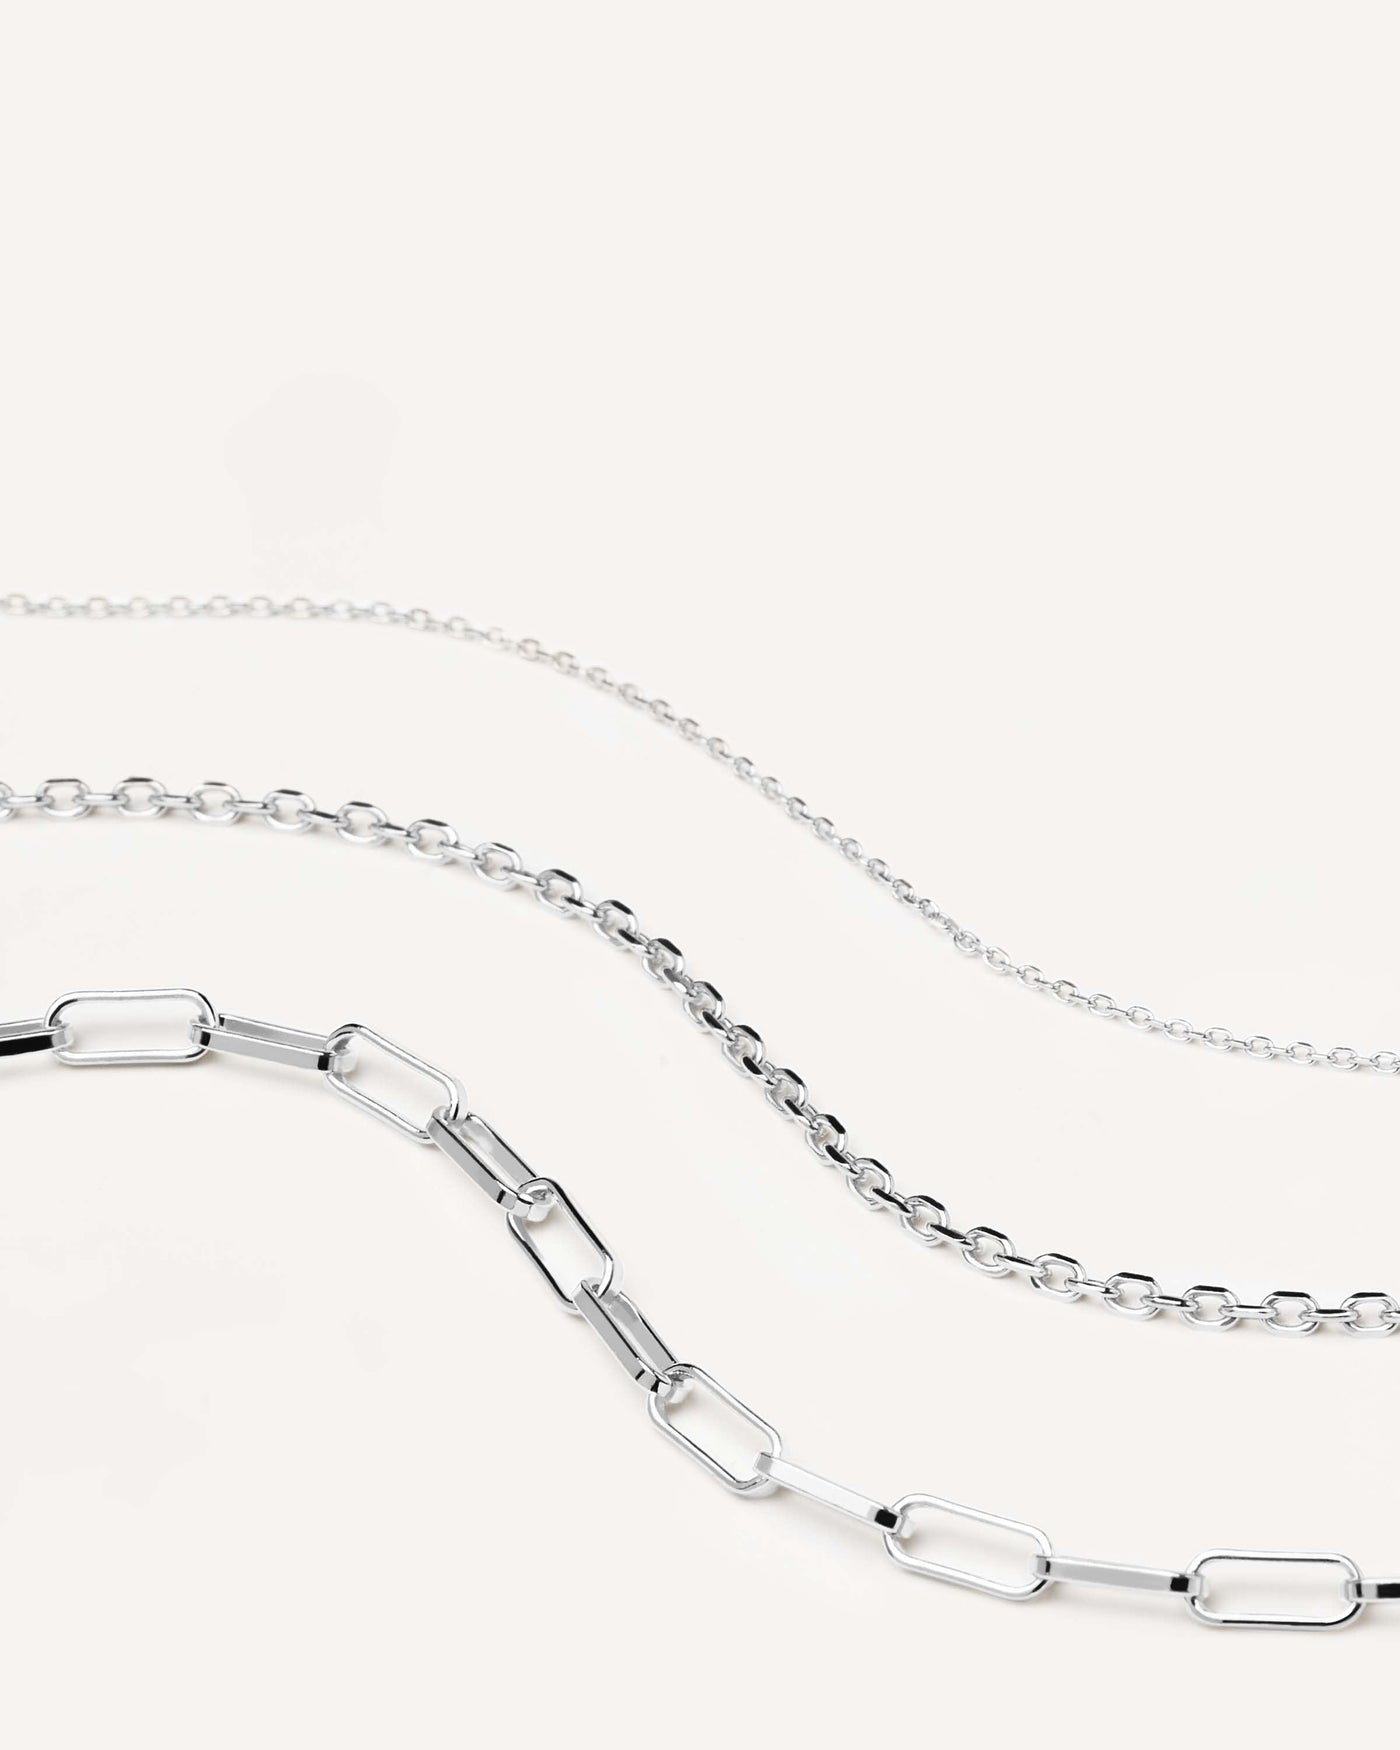 2023 Selection | Essential Silver Necklaces Set. Set of stackable 925 sterling silver chain necklaces in three link sizes and shapes. Get the latest arrival from PDPAOLA. Place your order safely and get this Best Seller. Free Shipping.